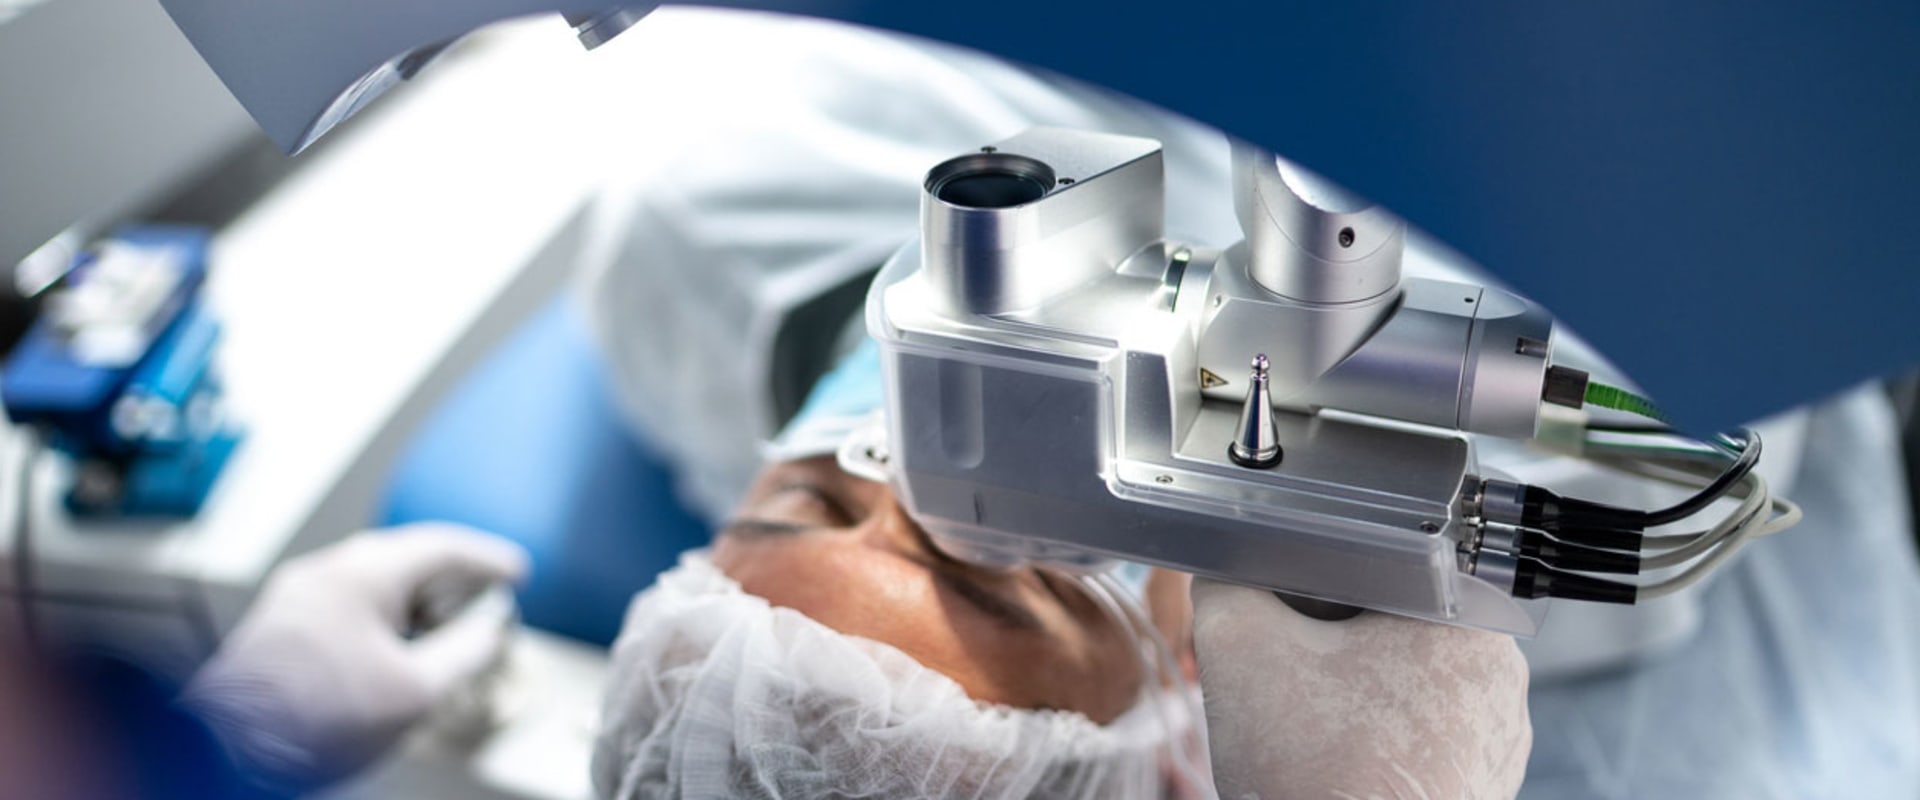 What Type of Anesthesia is Used During Cataract Surgery?